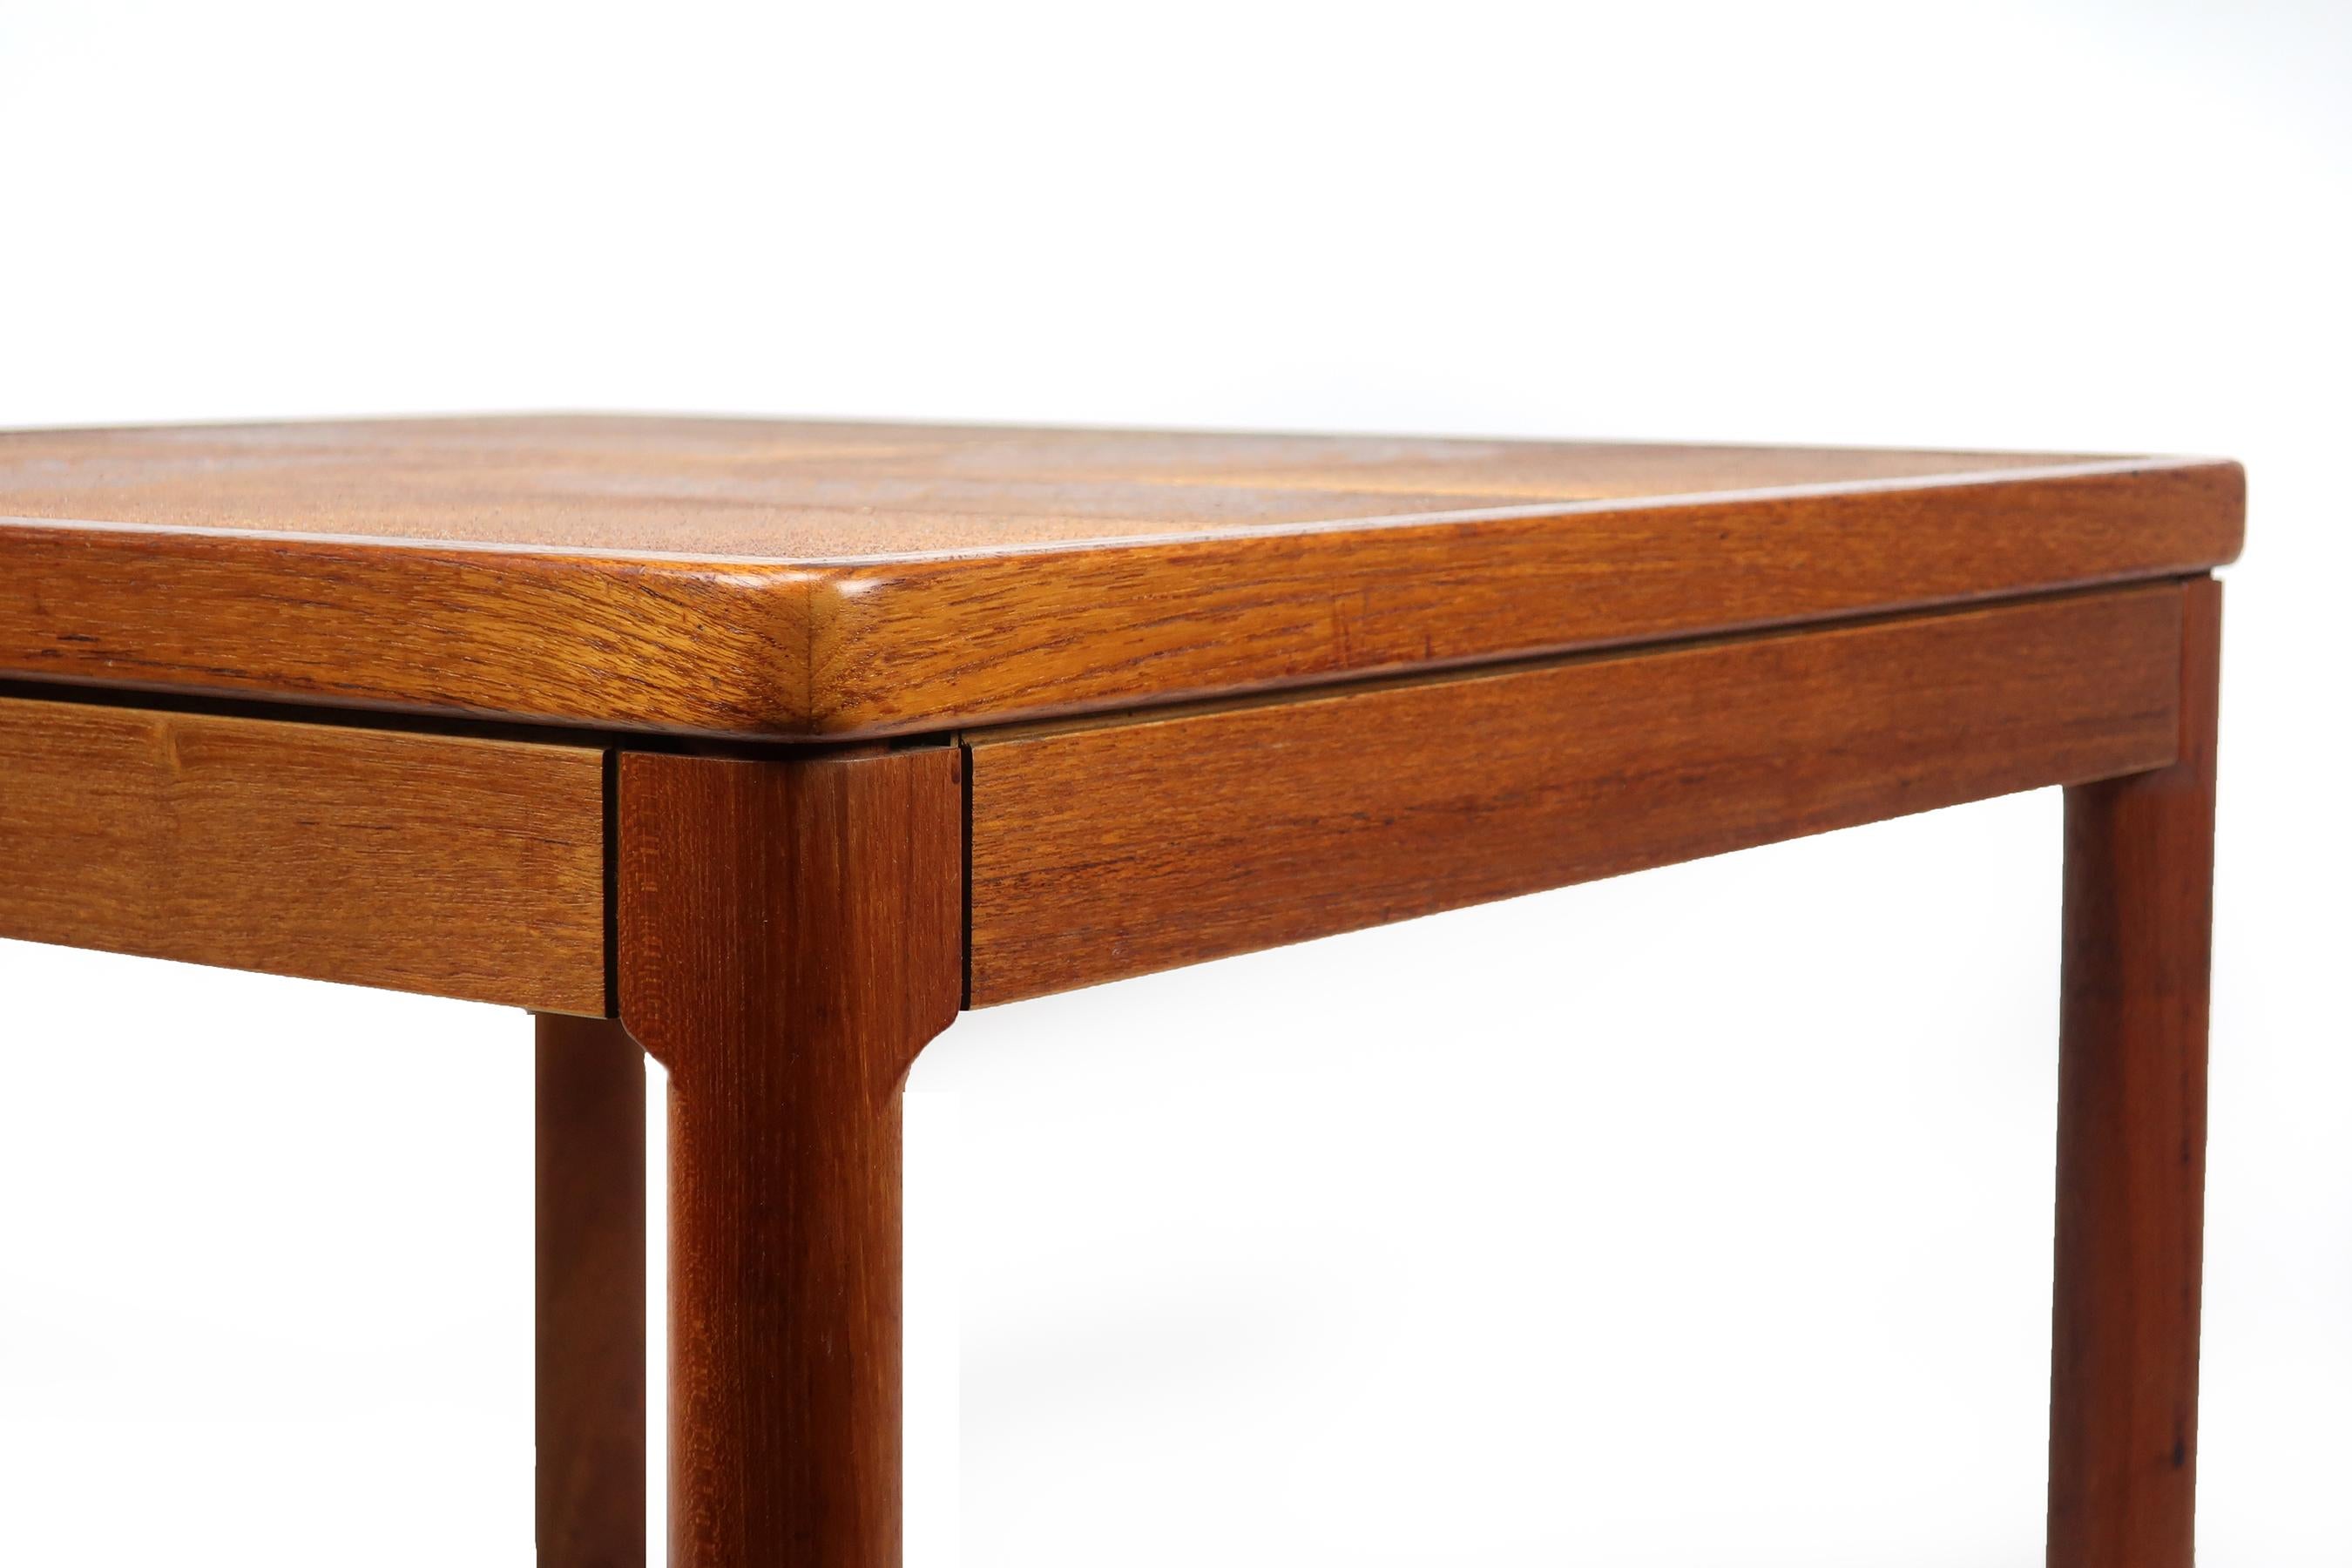 20th Century Danish Modern Teak and Tile Side Table by Trioh